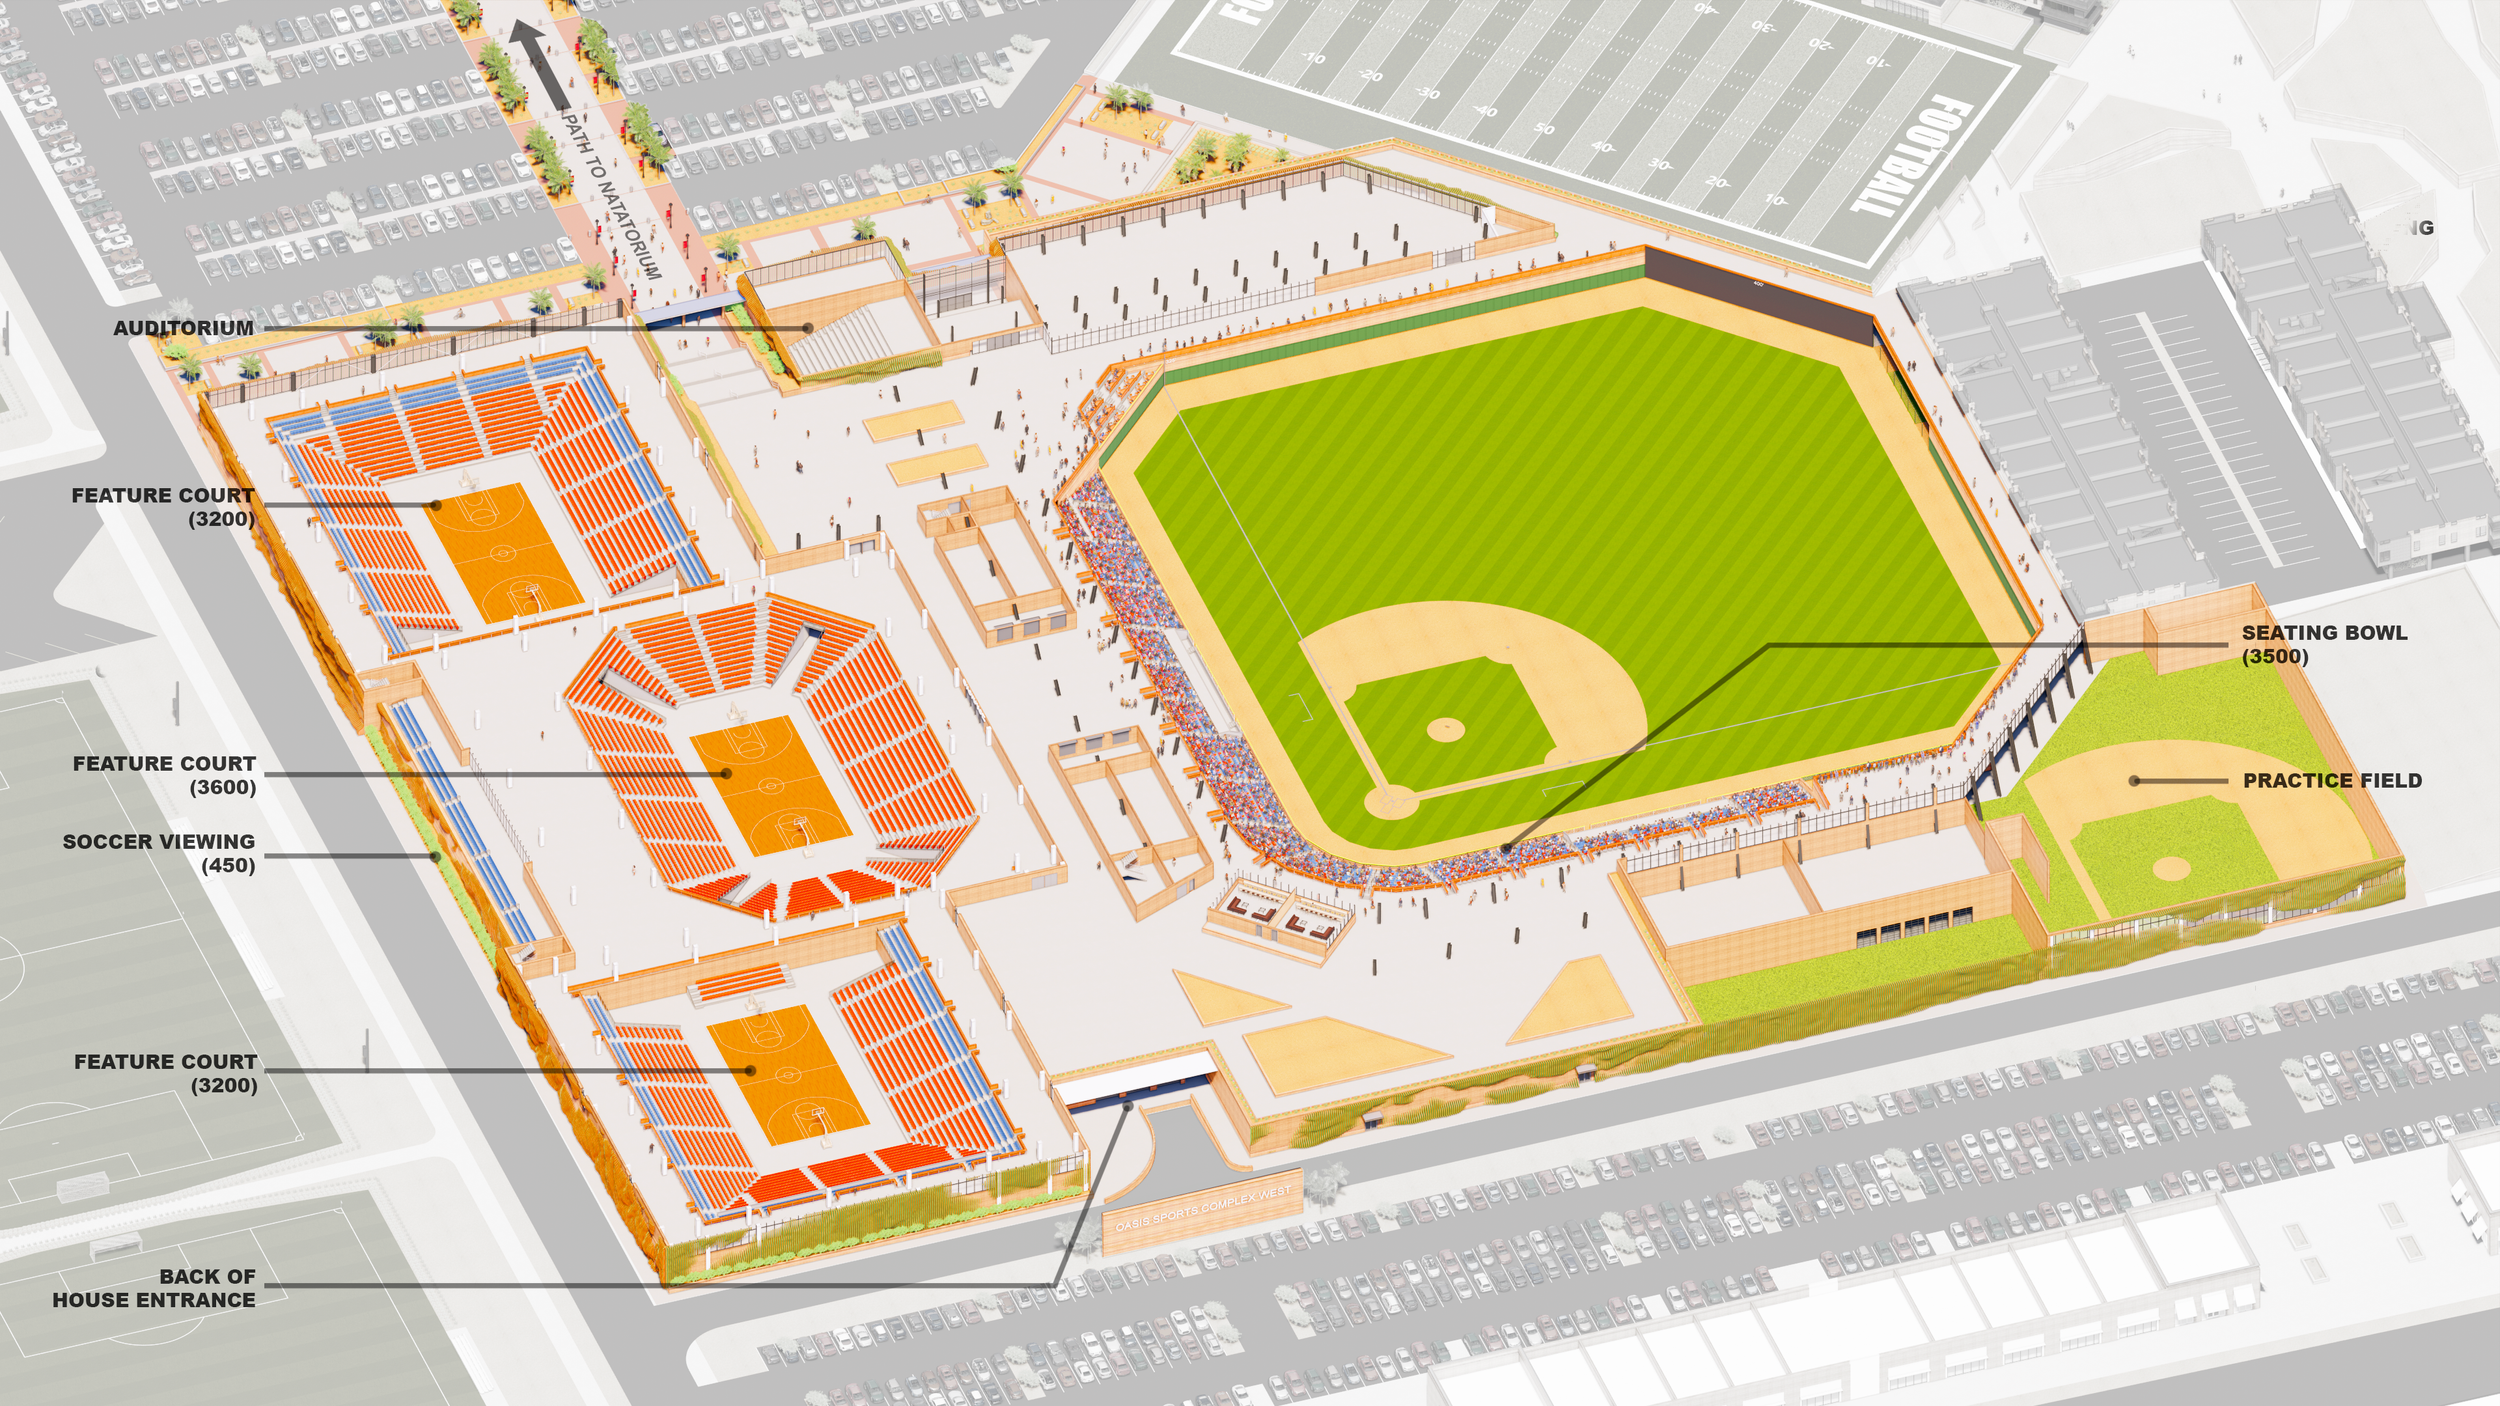 BASEBALL_CONCOURSE_3 COURT_SIMPLIFIED.png